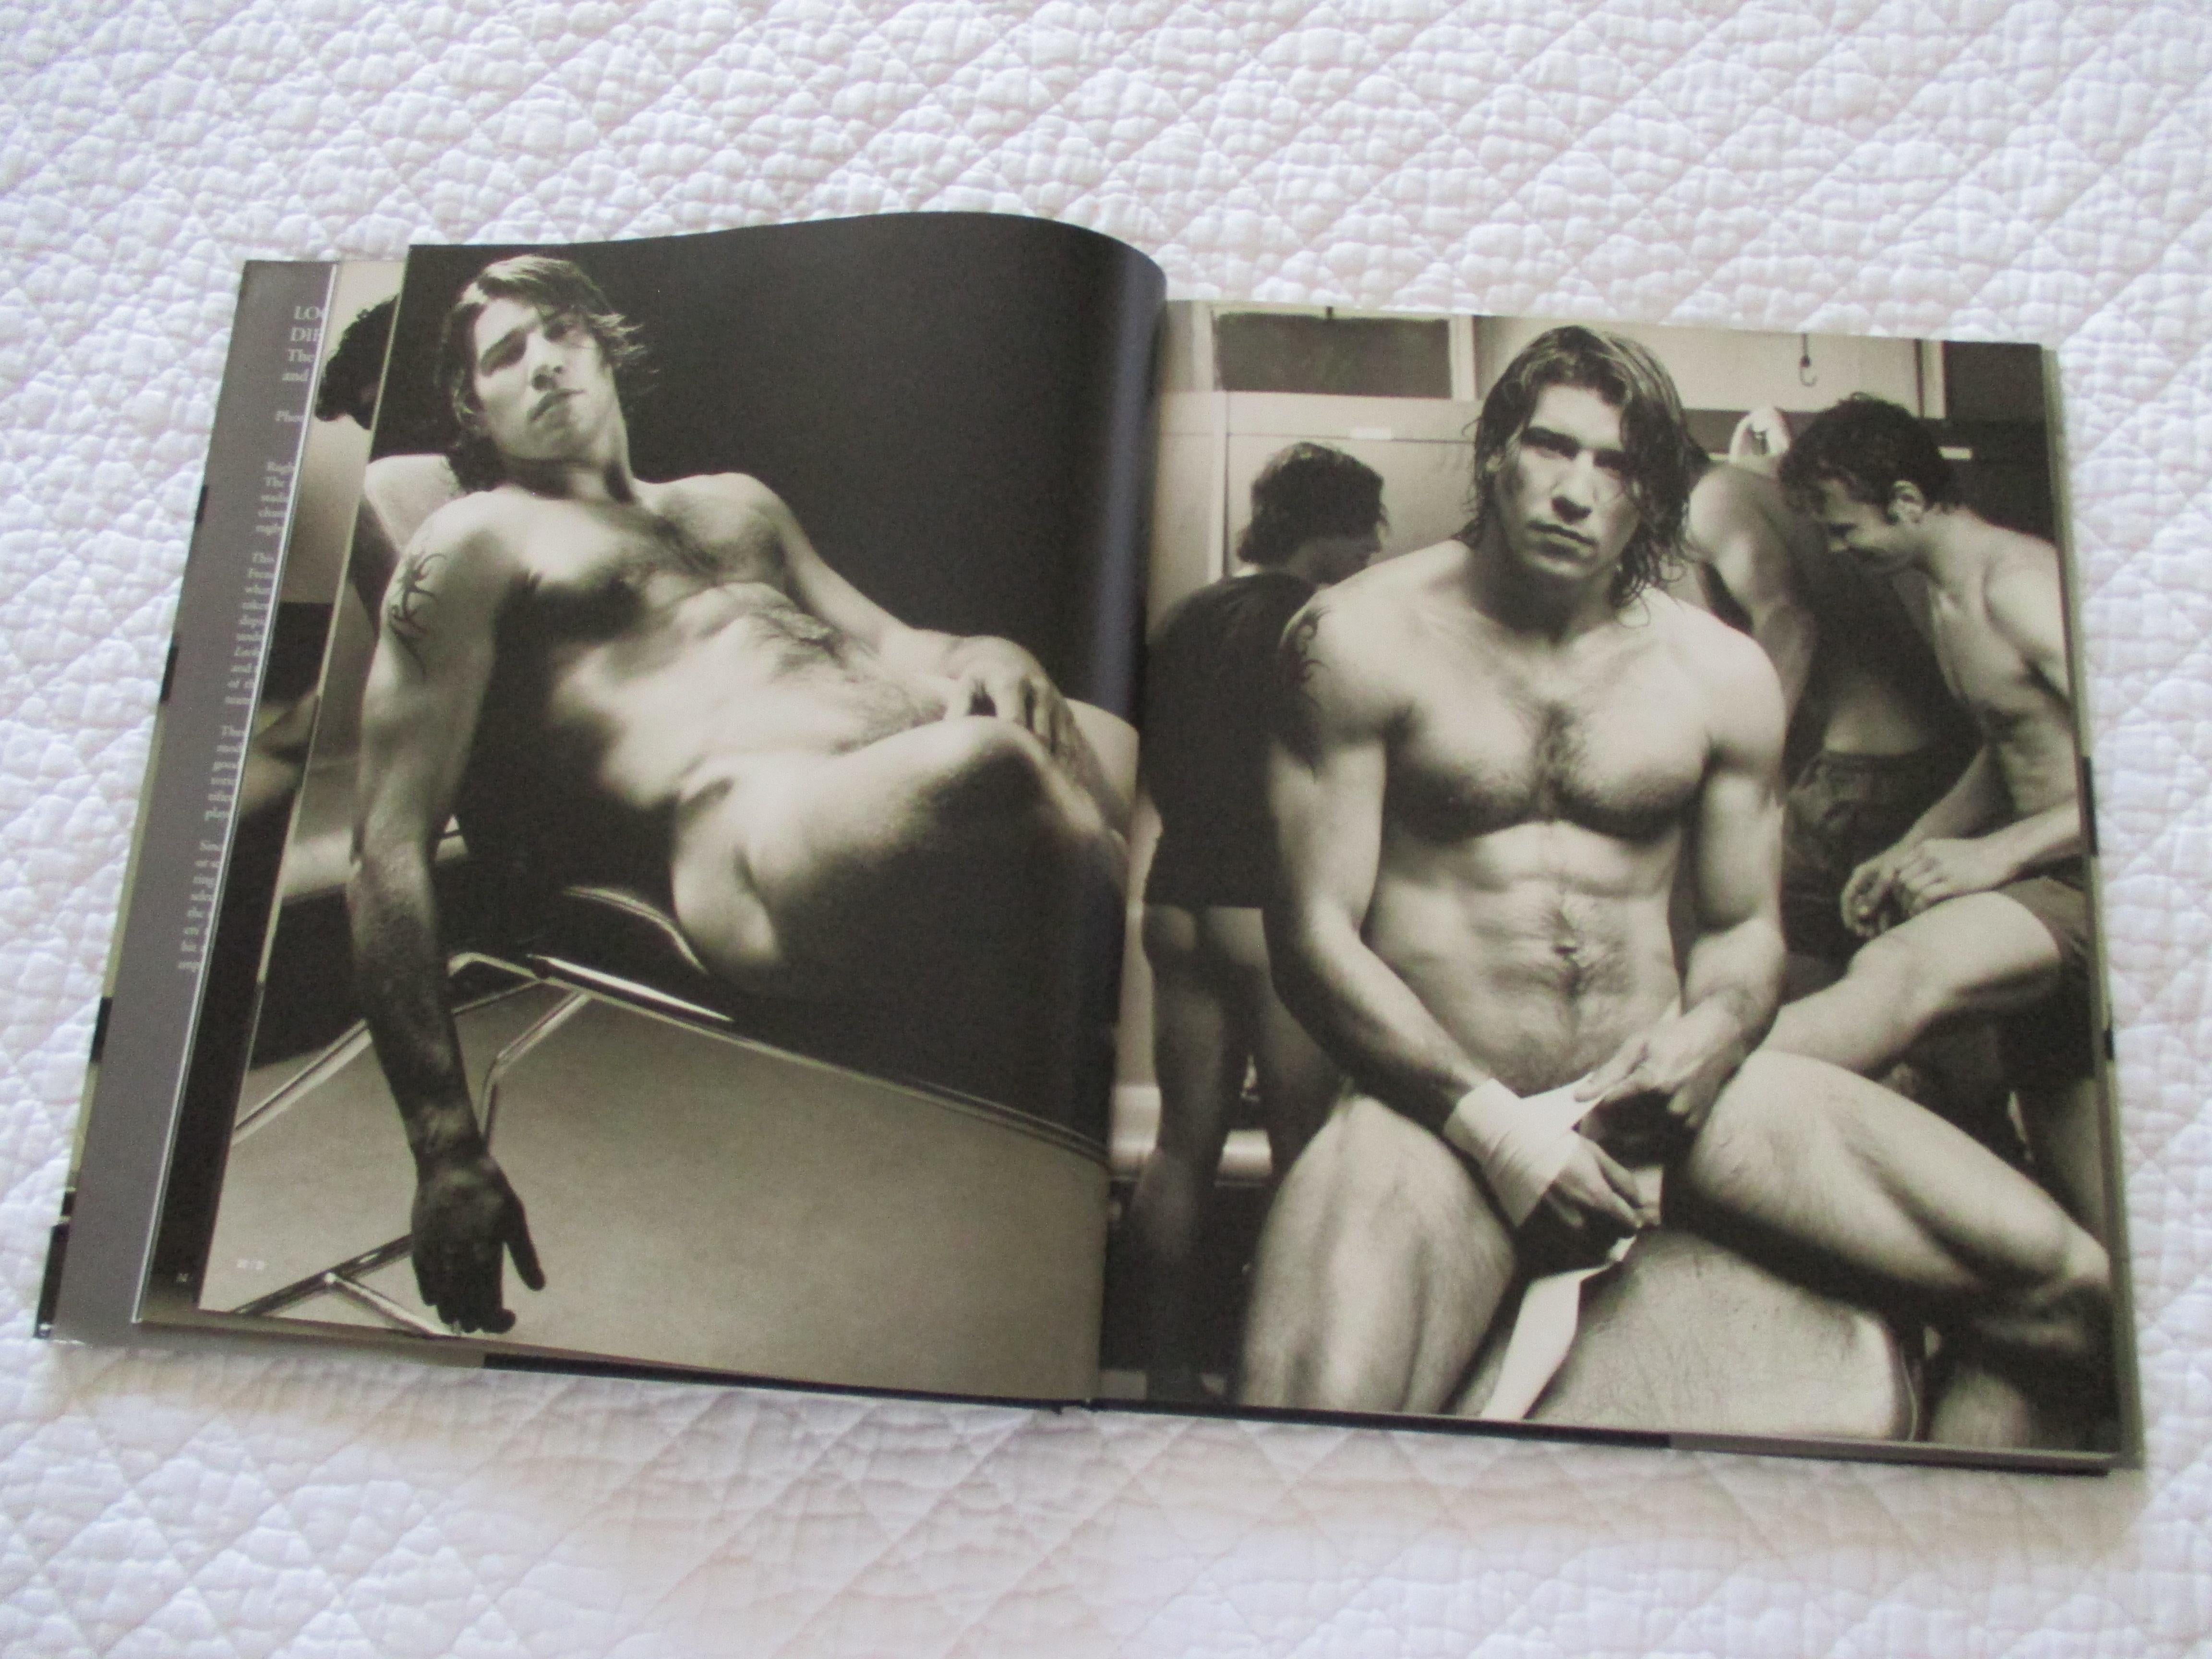 Locker room nudes hard cover coffee table book by Francois Rousseau
This remarkable collection of candid nude photos of France’s national rugby team goes beneath the uniform to reveal what real jocks look like underneath it all. Each image taken by